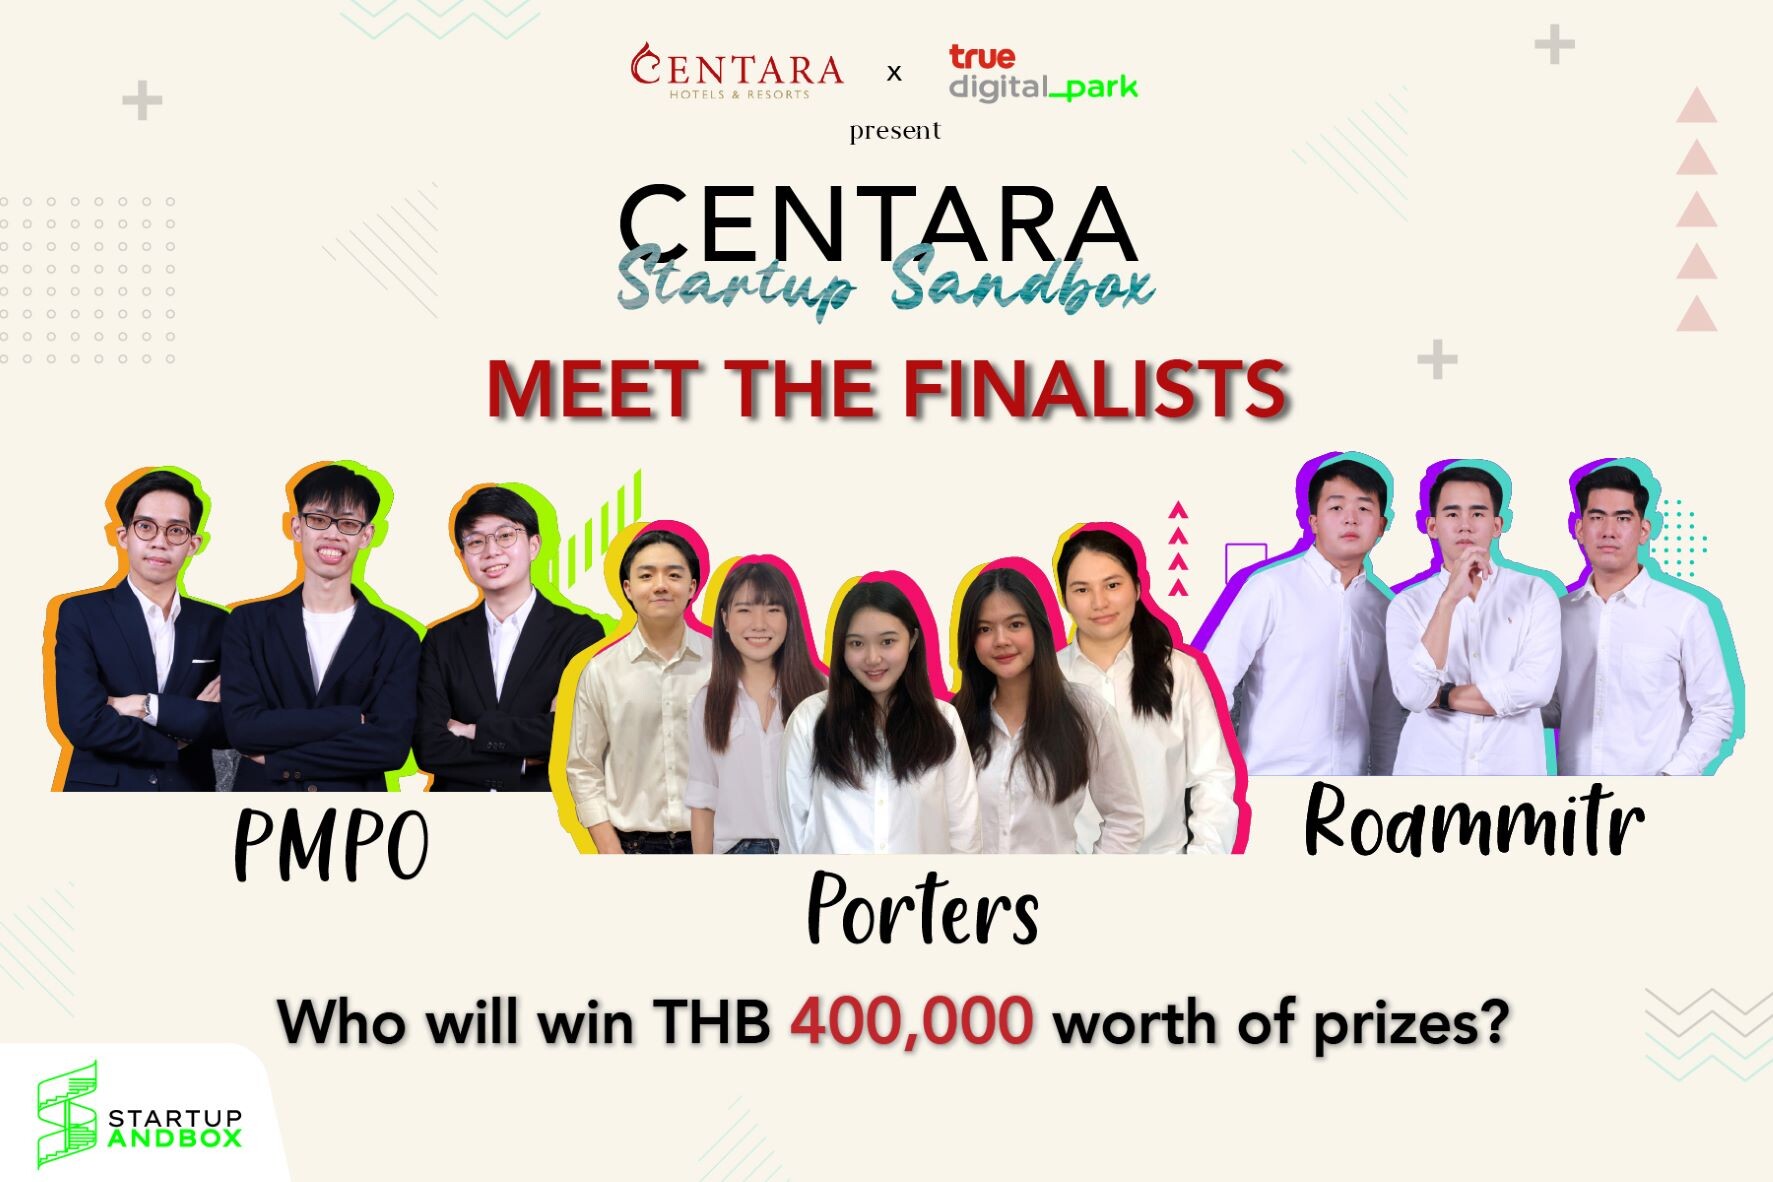 Centara Reveals Final Three Teams in The Running to Win Inaugural Start-up Competition